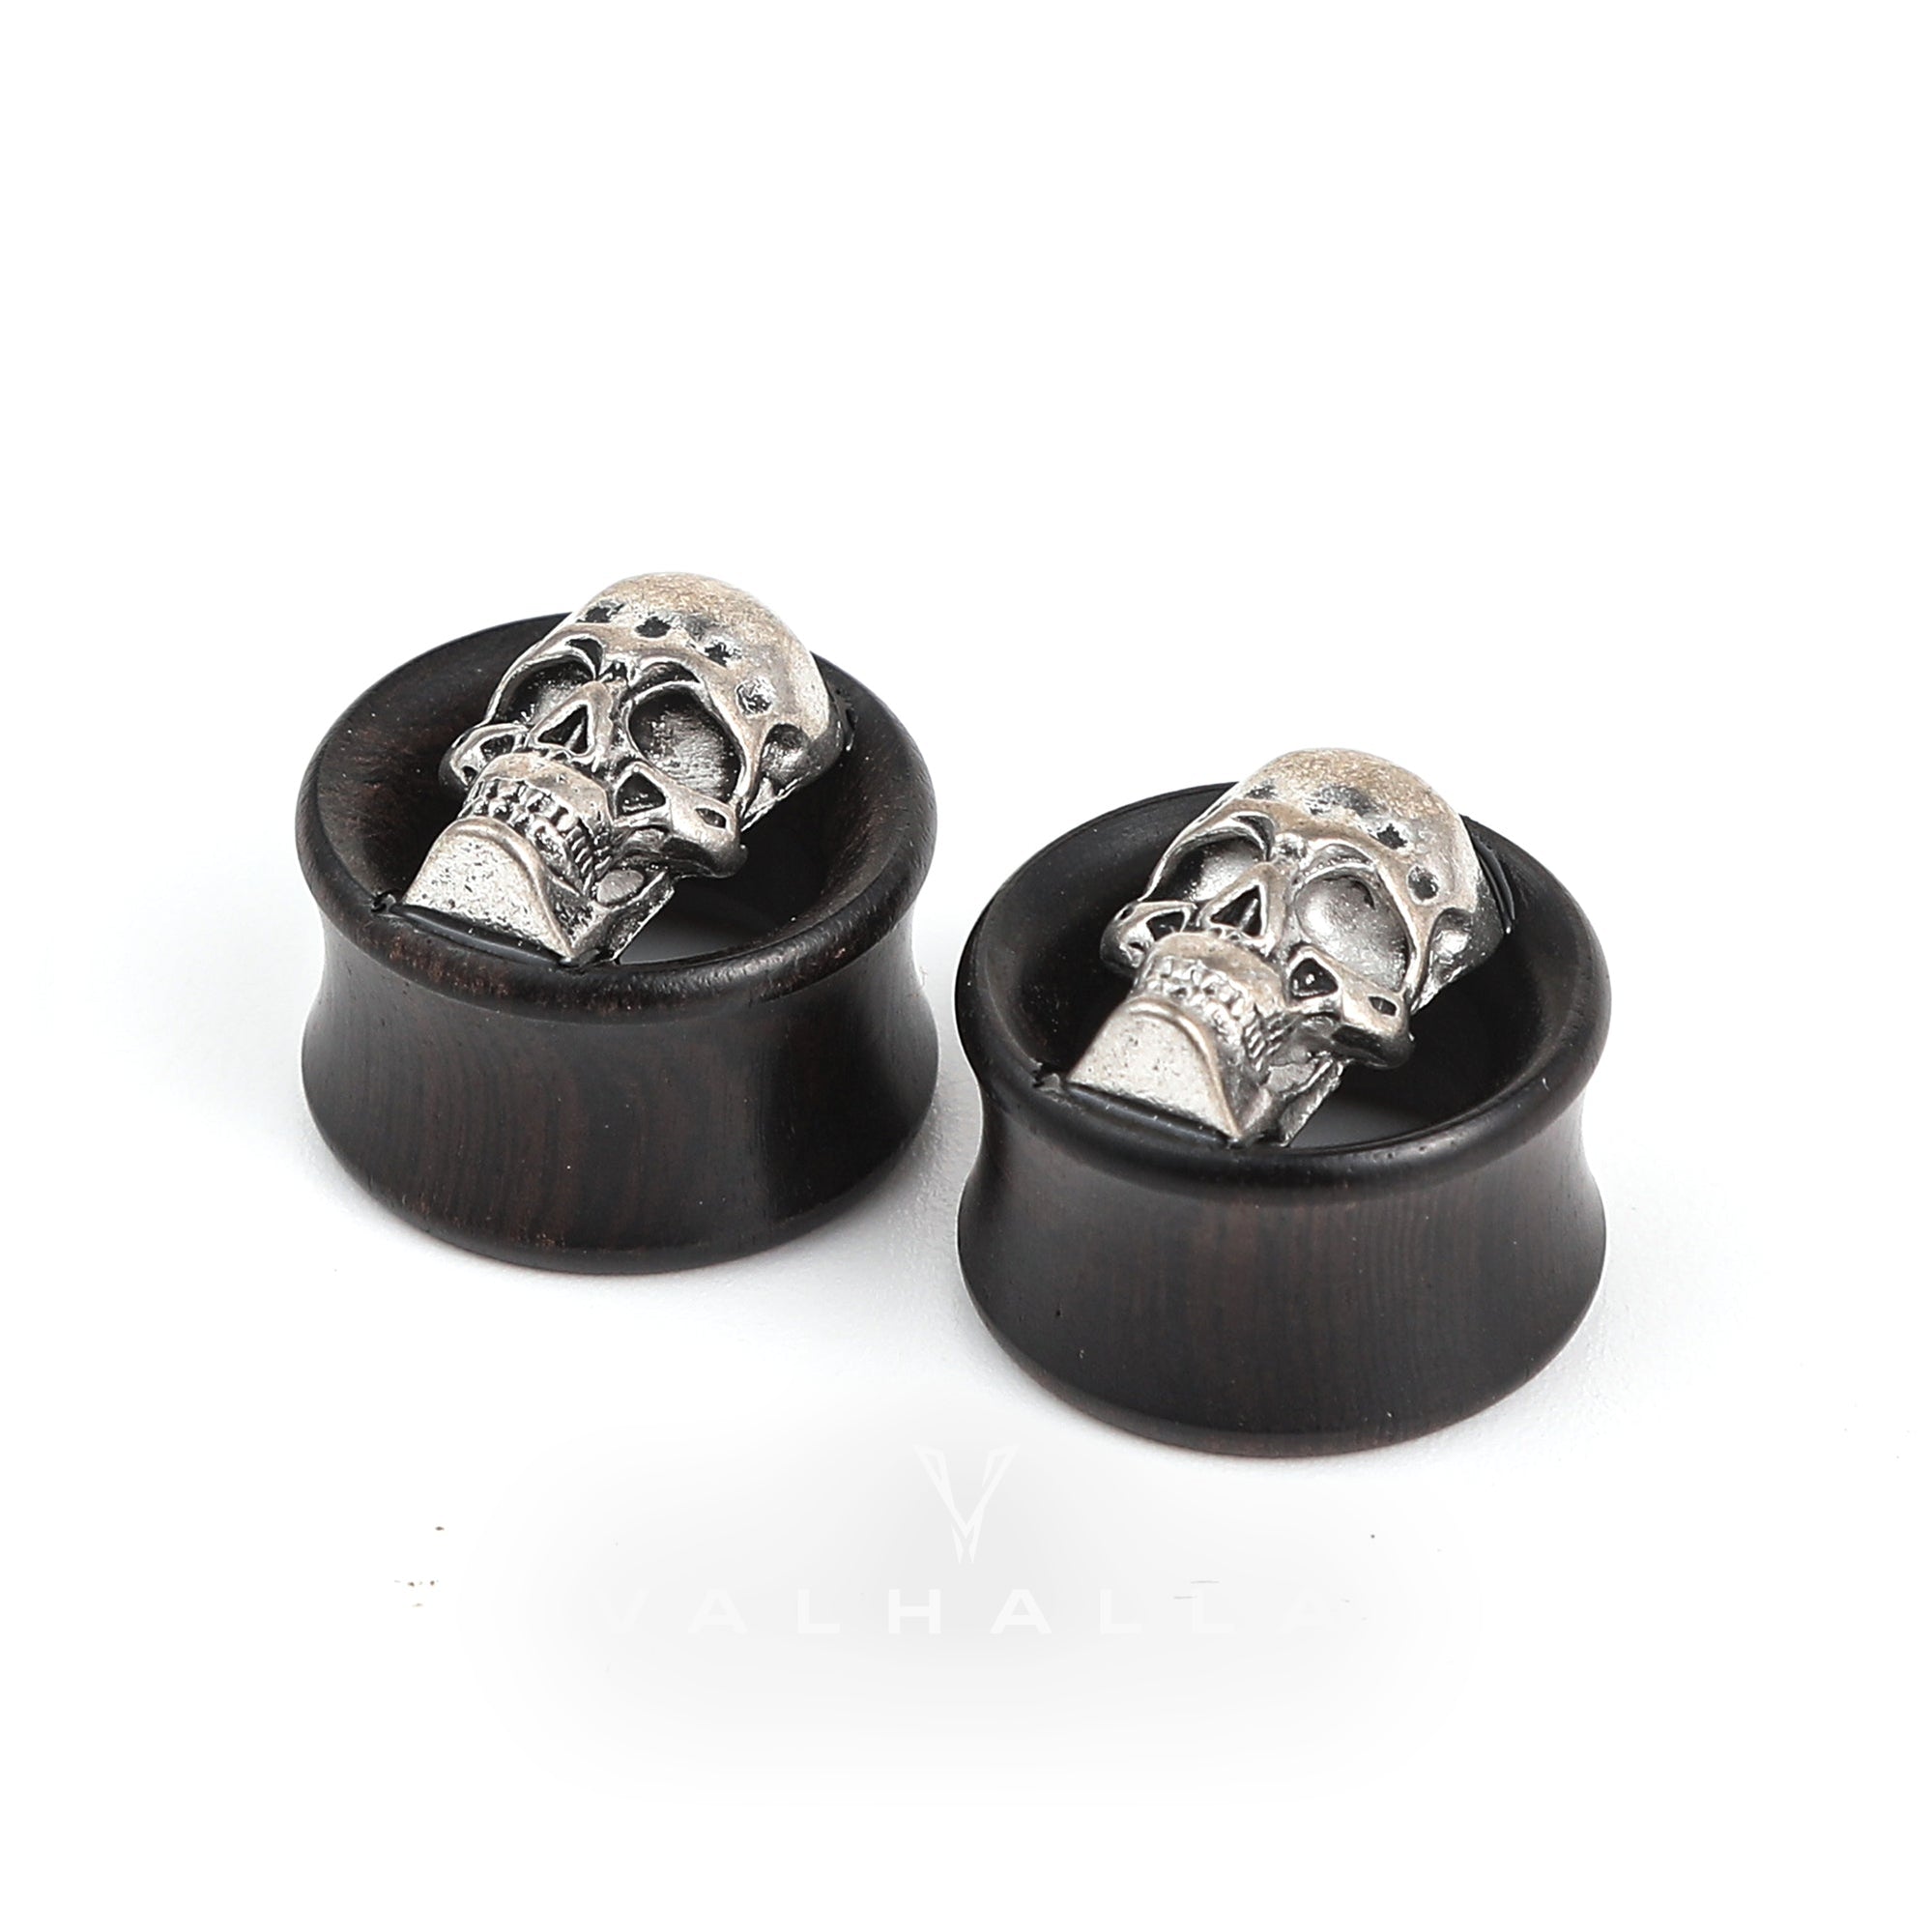 Skull And Star Wood Alloy Ear Gauges Stainless Steel